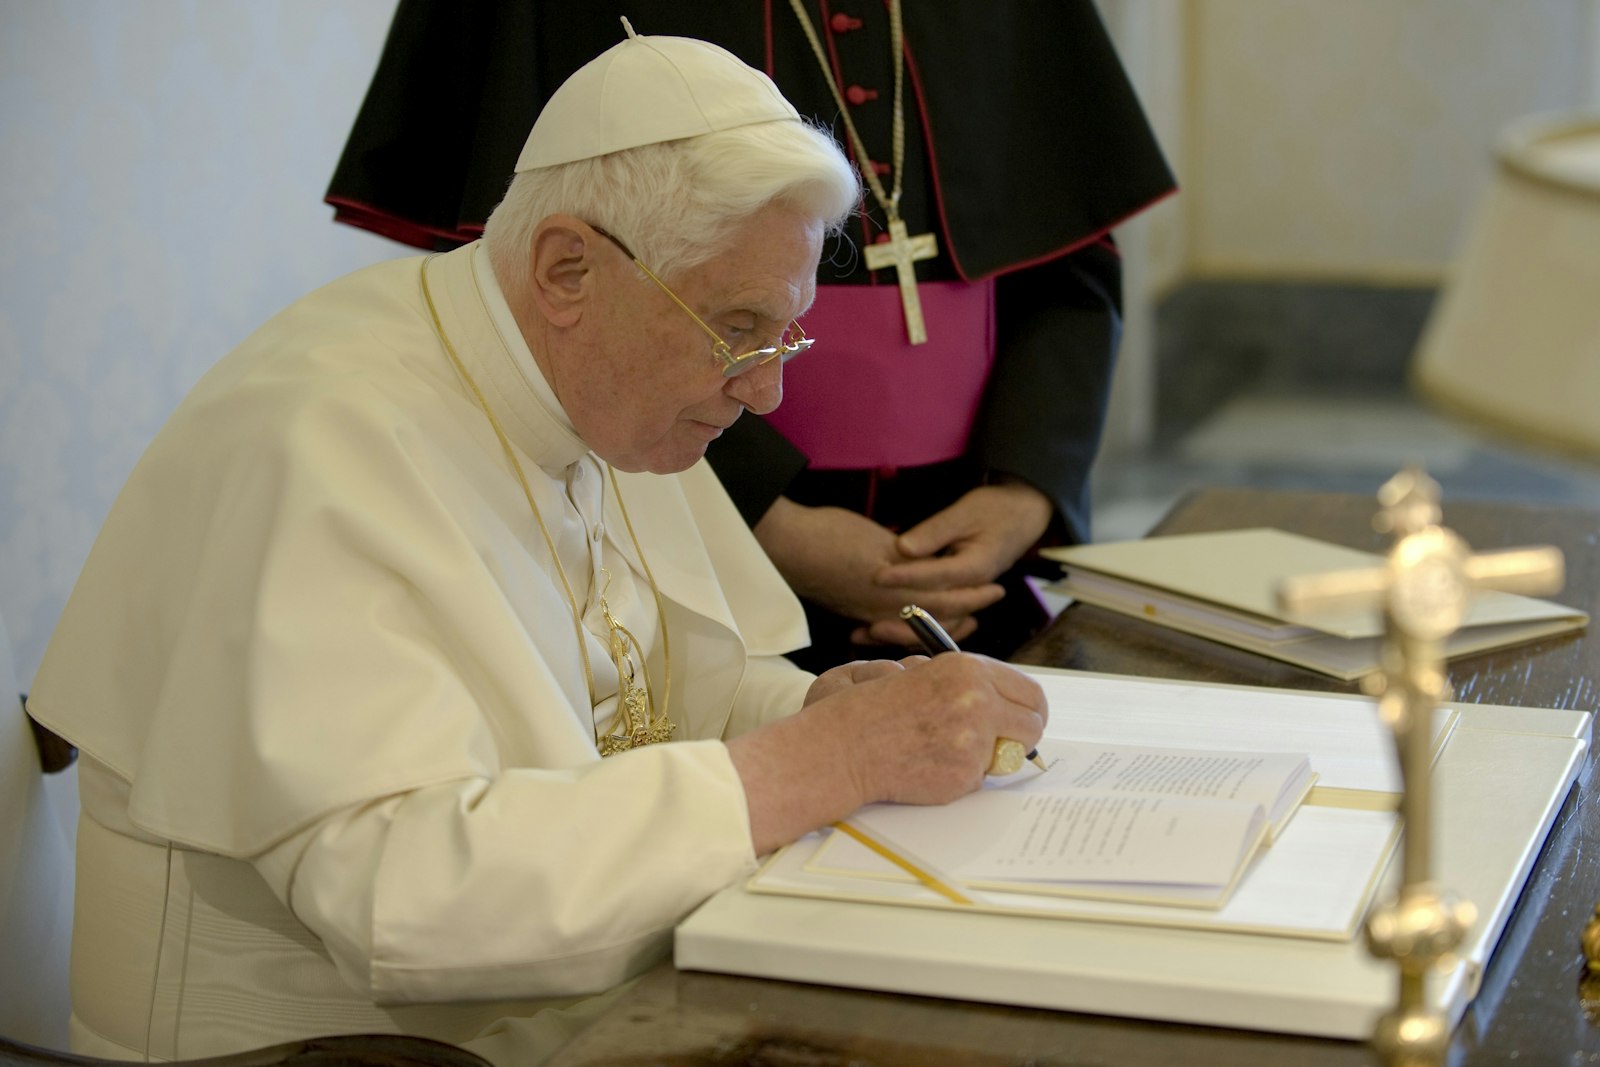 Pope Benedict XVI signs a copy of his encyclical, "Caritas in Veritate" ("Charity in Truth"), at the Vatican July 6, 2009. (CNS photo/L'Osservatore Romano via Catholic Press Photo)